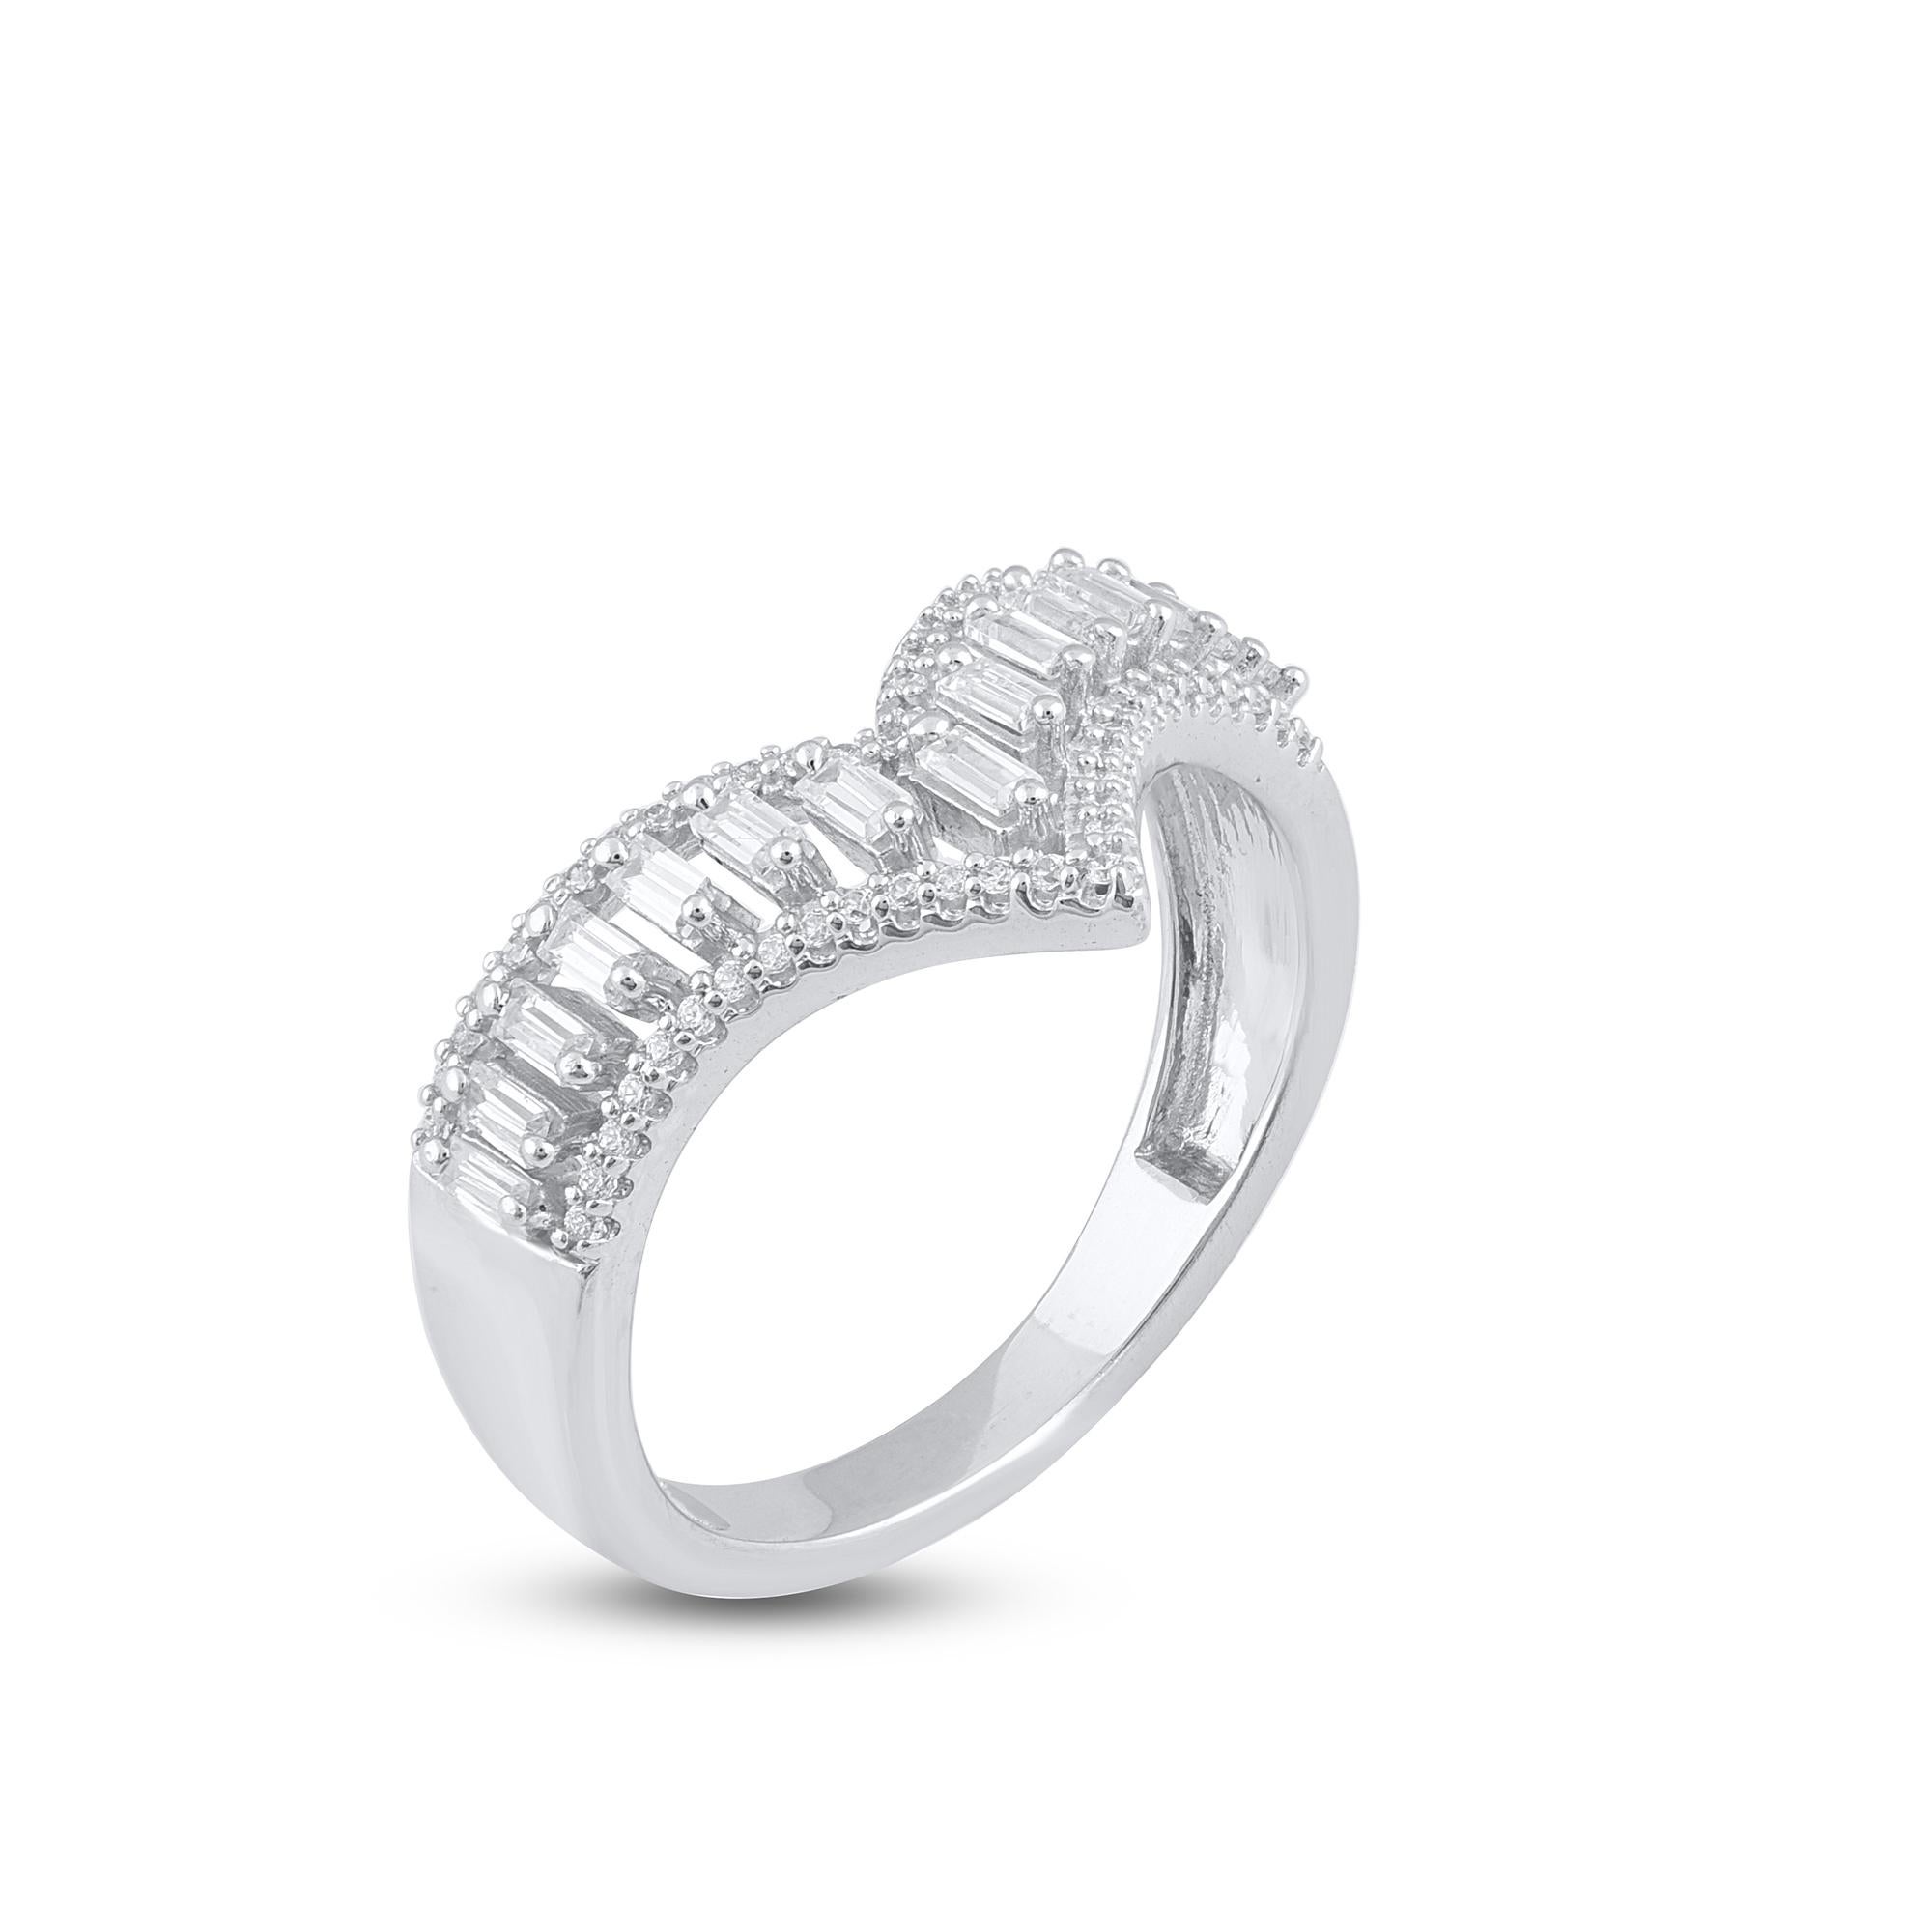 Make lifelong memory with this enticing curve design diamond wedding band ring. The ring is crafted from 14-karat gold in your choice of white, rose, or yellow, and features Round Brilliant 56 and Baguette - 15 white diamonds, Prong set, H-I color